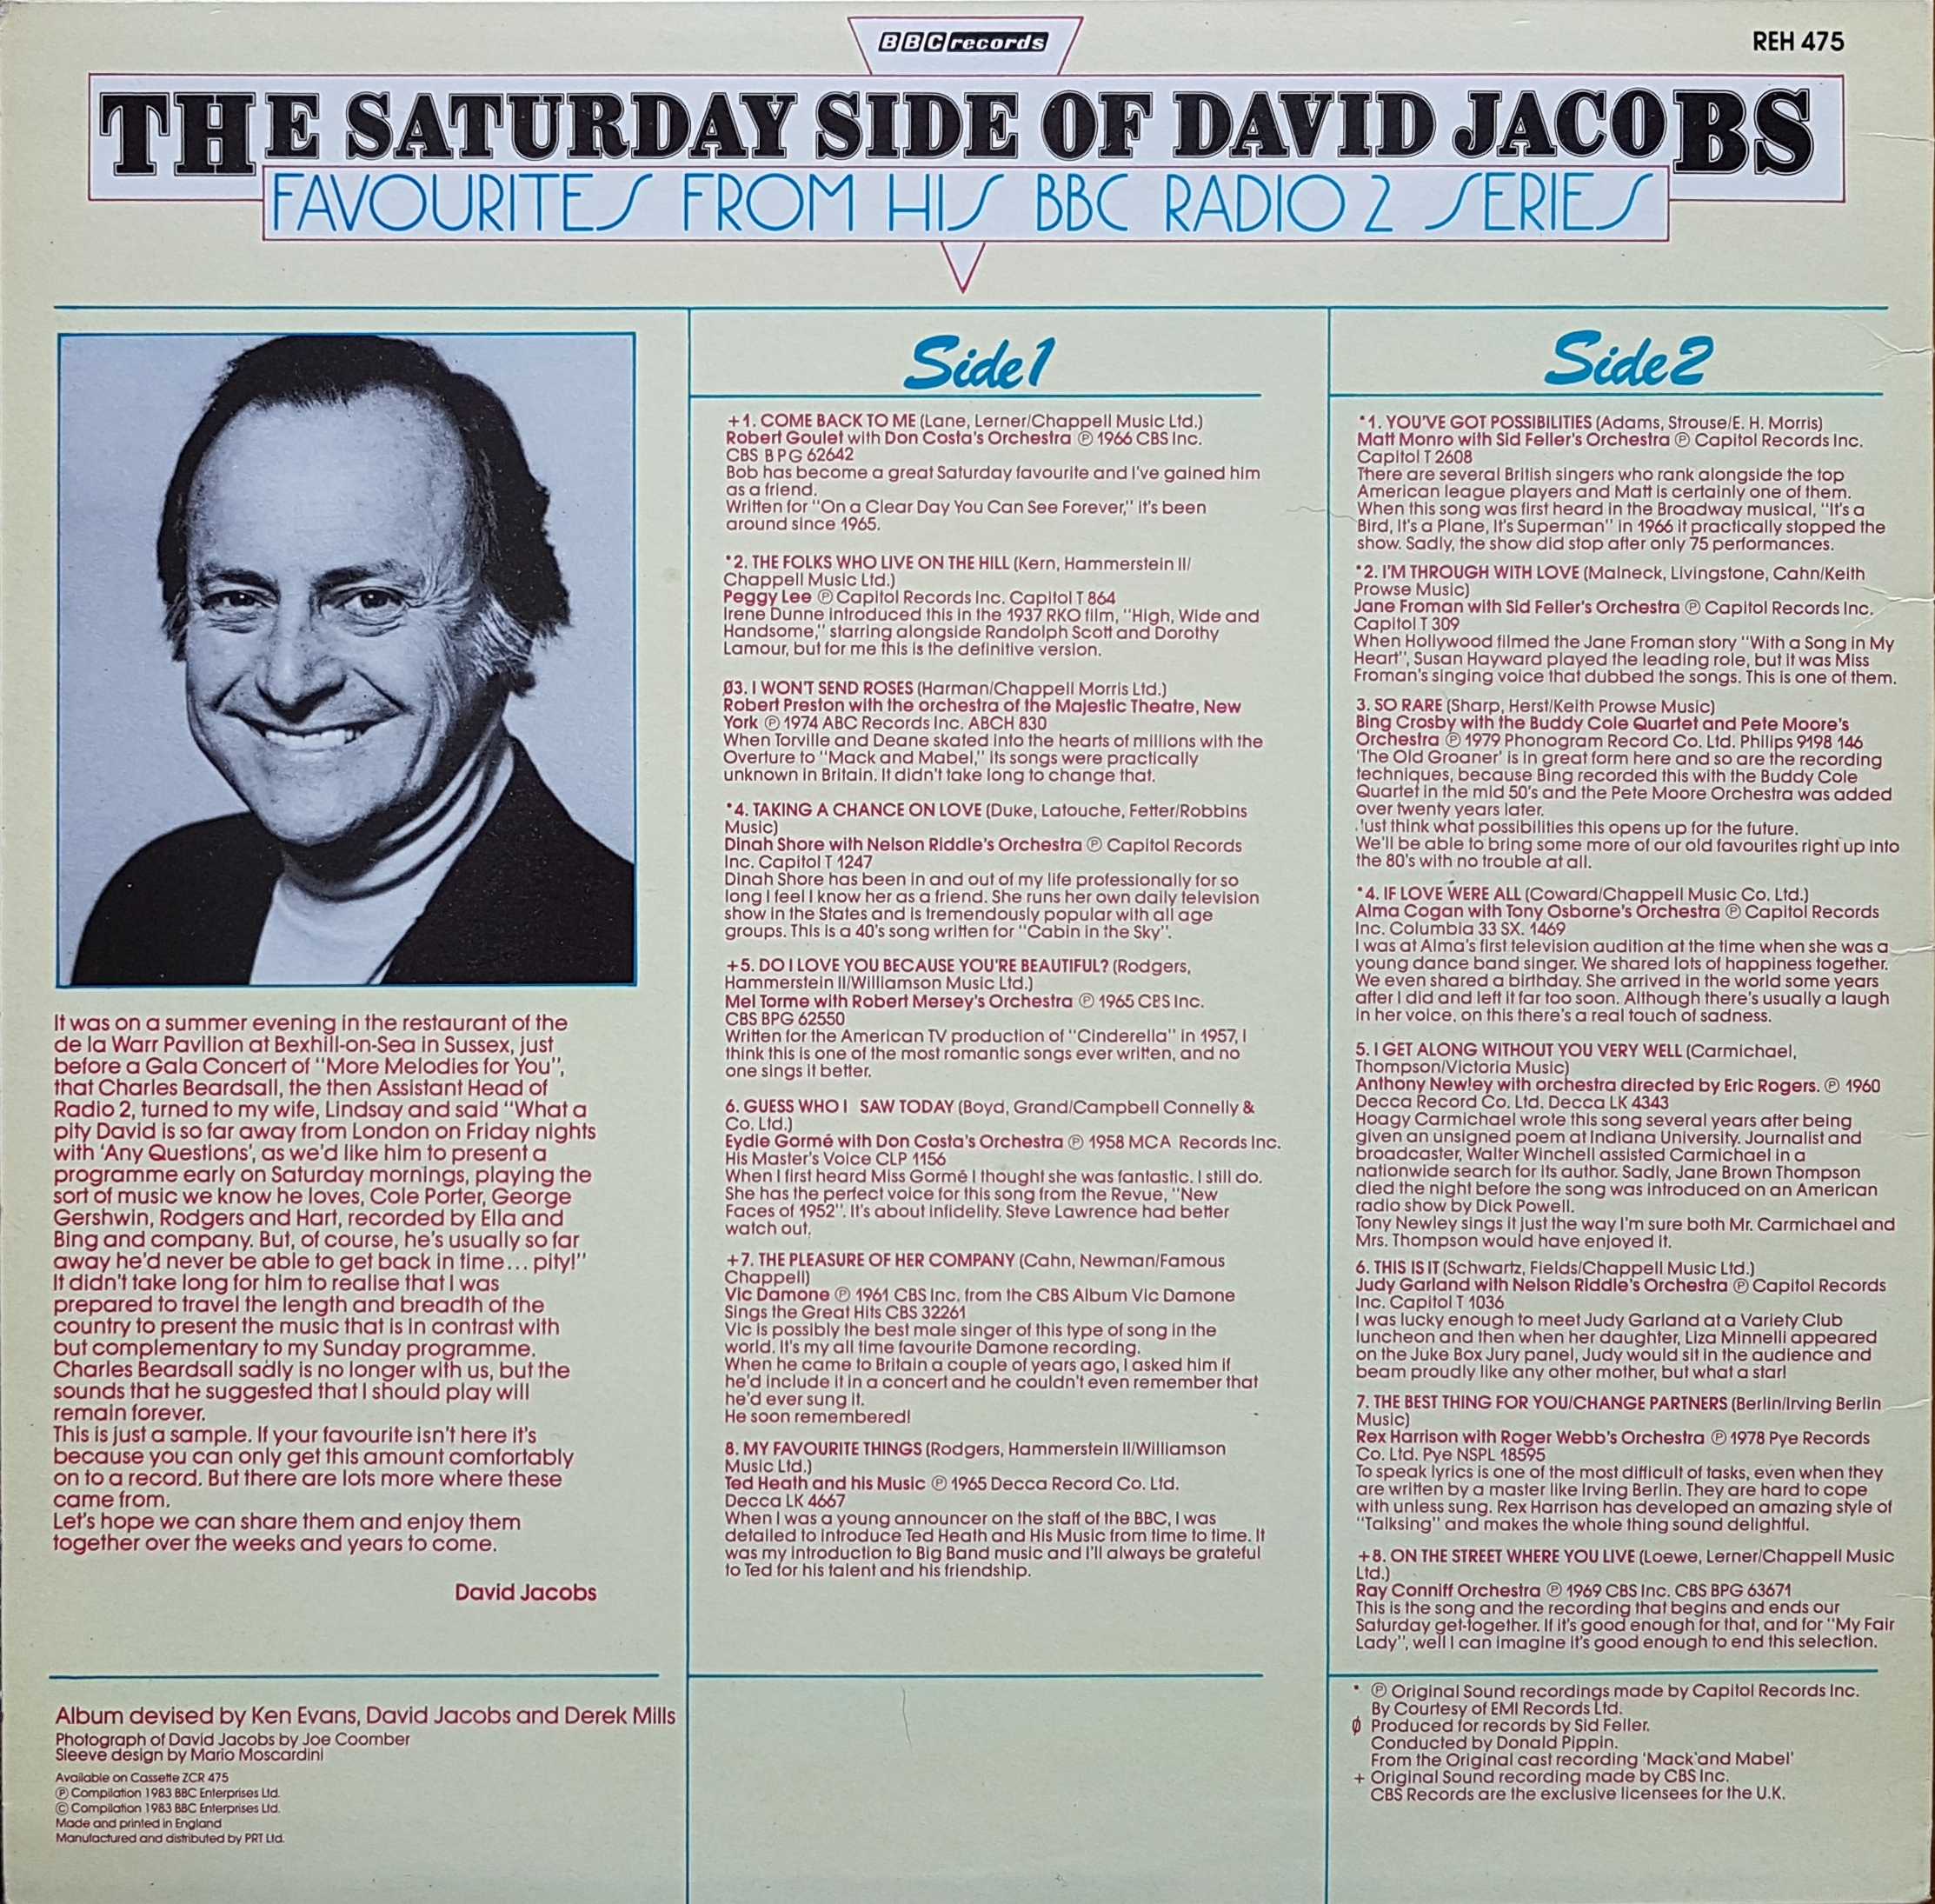 Picture of REH 475 The Saturday side of David Jacobs by artist David Jacobs from the BBC records and Tapes library